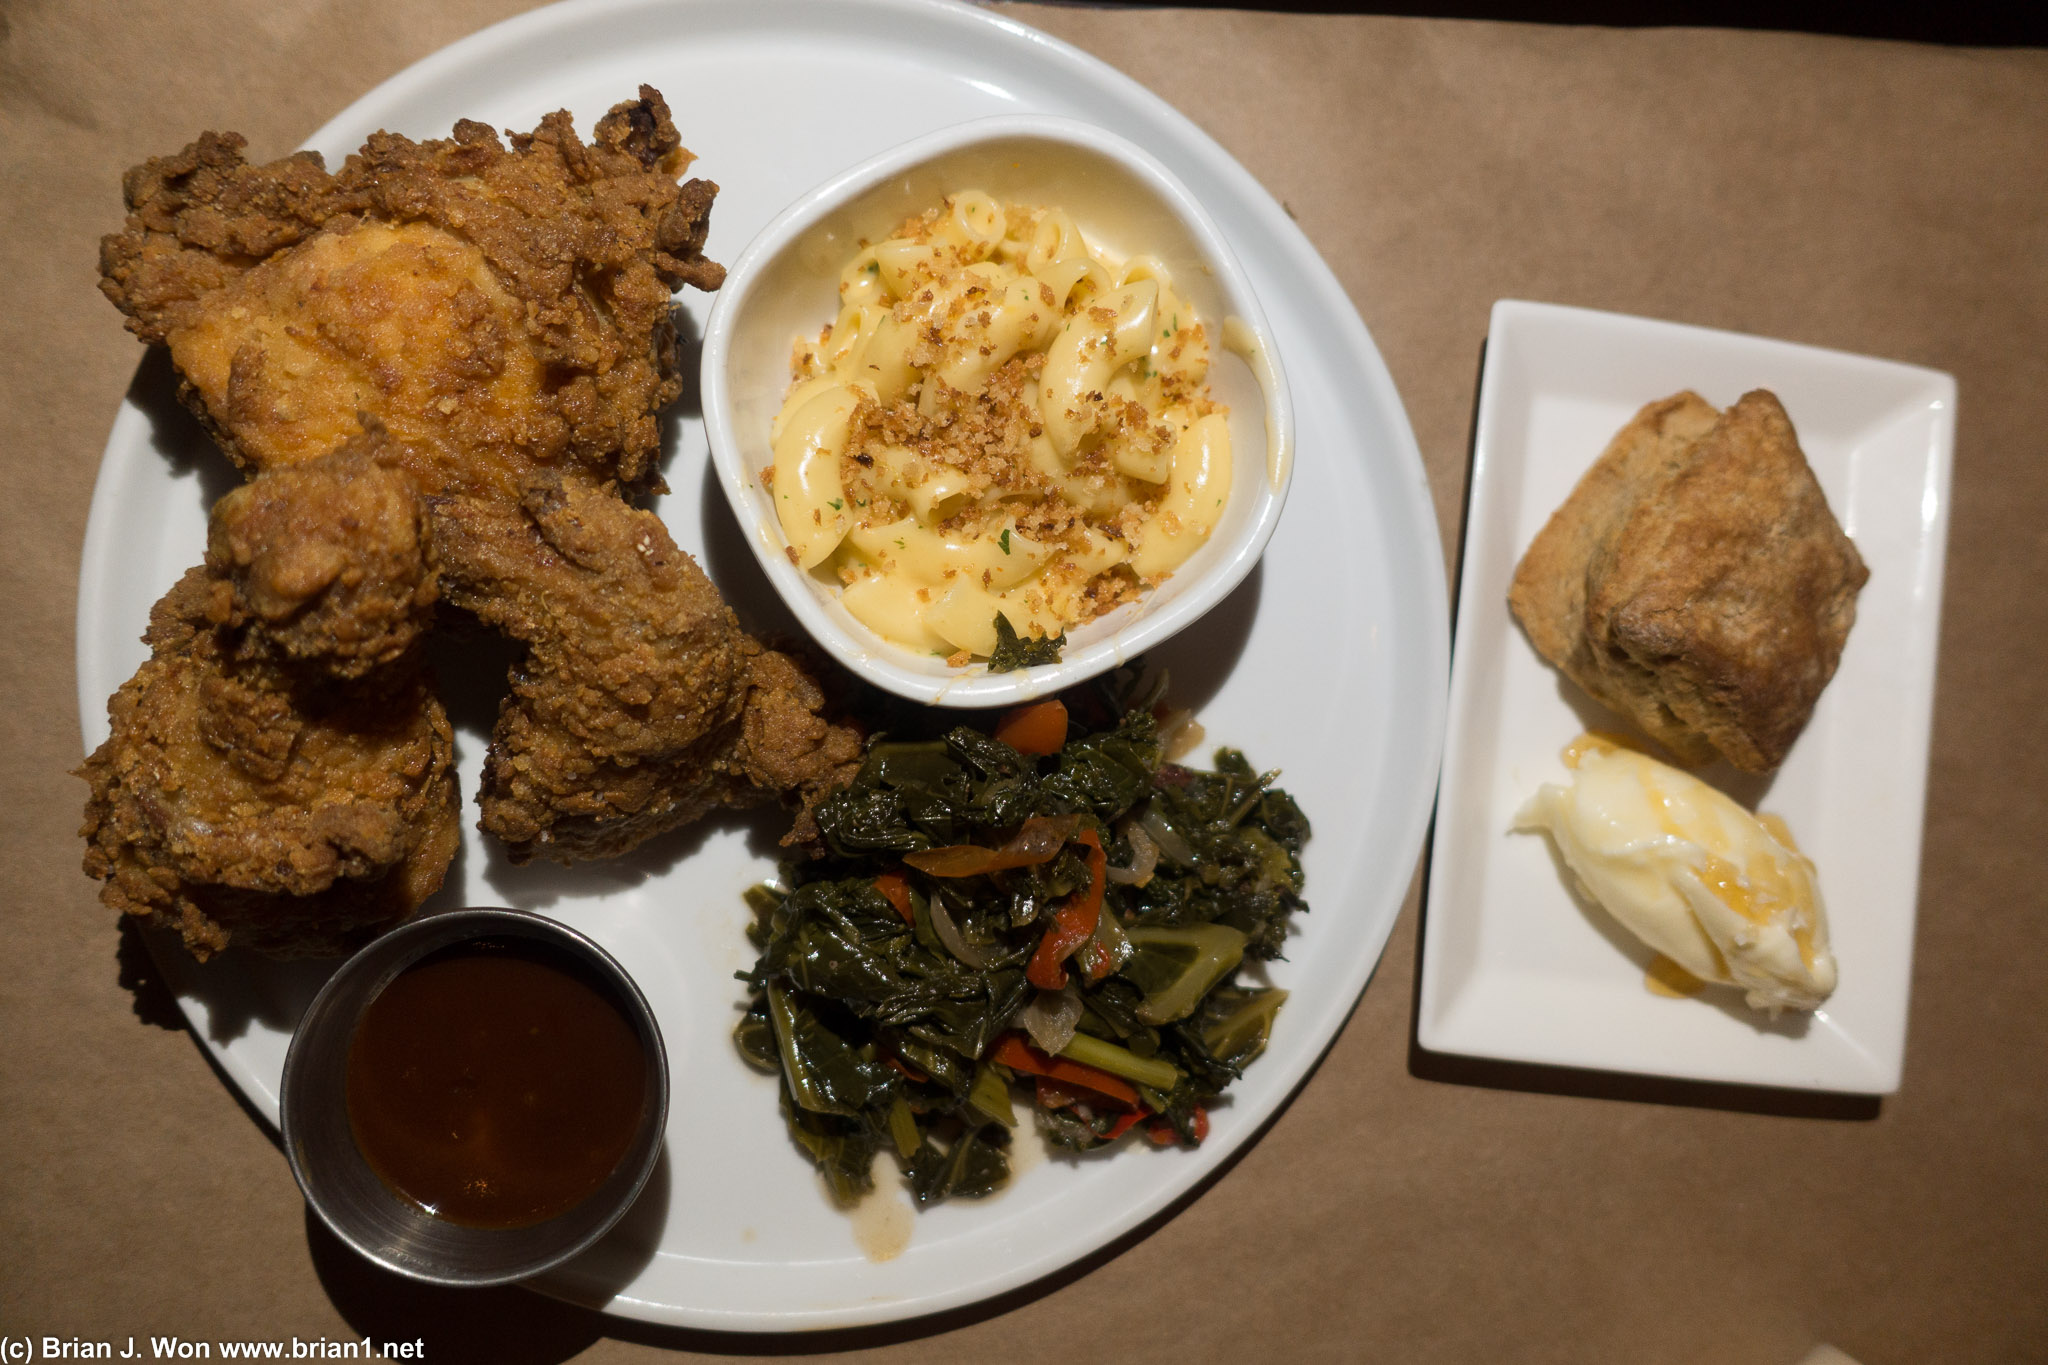 Fried chicken, collard greens, and biscuit were all very, very good. Mac and cheese was nice and light.